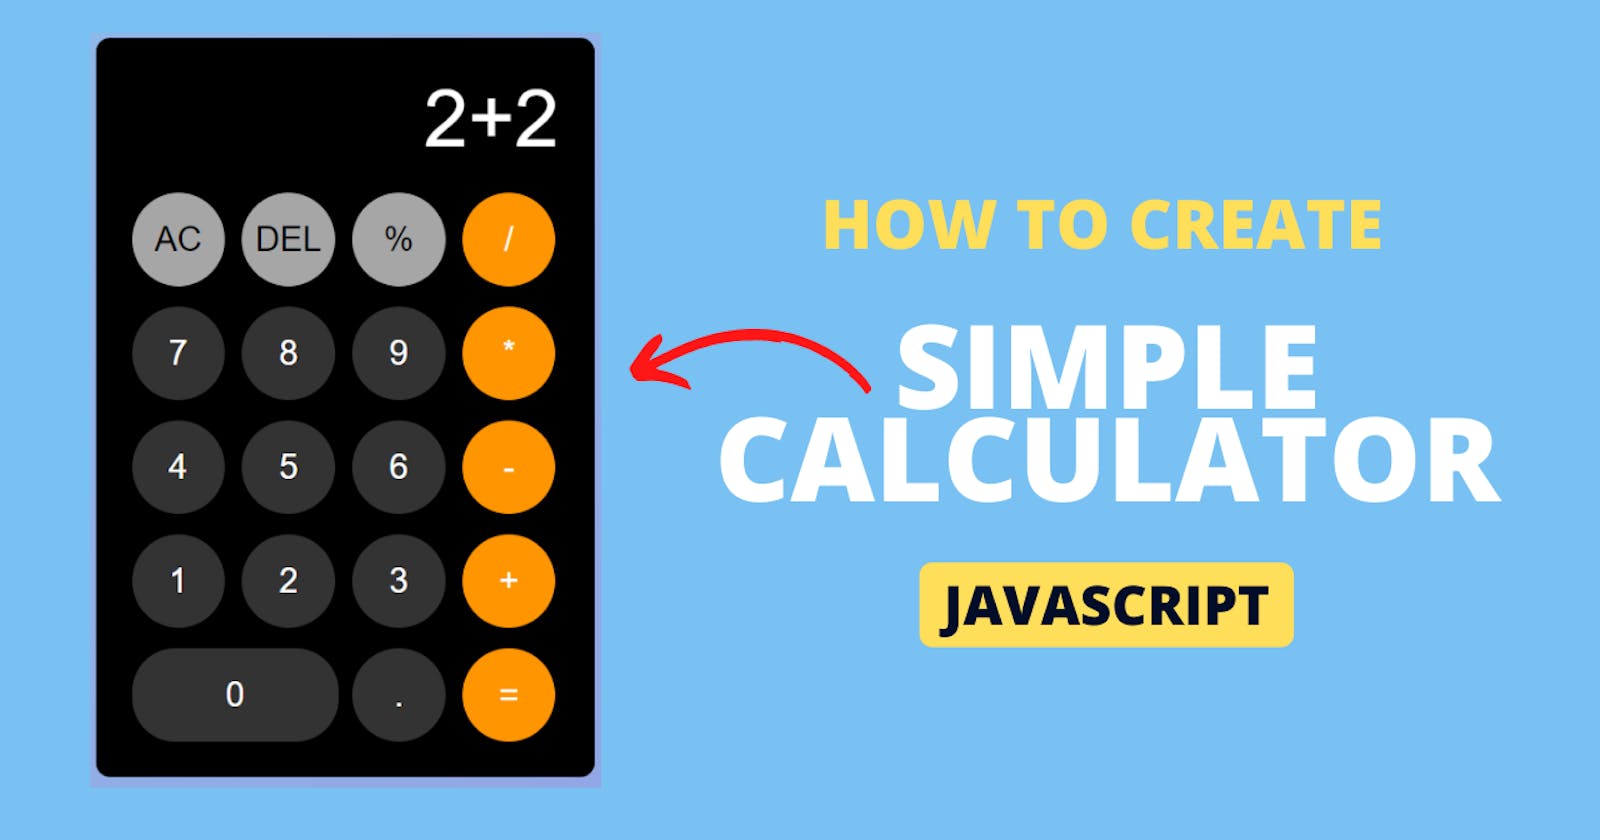 How To Create a Calculator Using HTML CSS & JavaScript | Simple Calculator in JavaScript